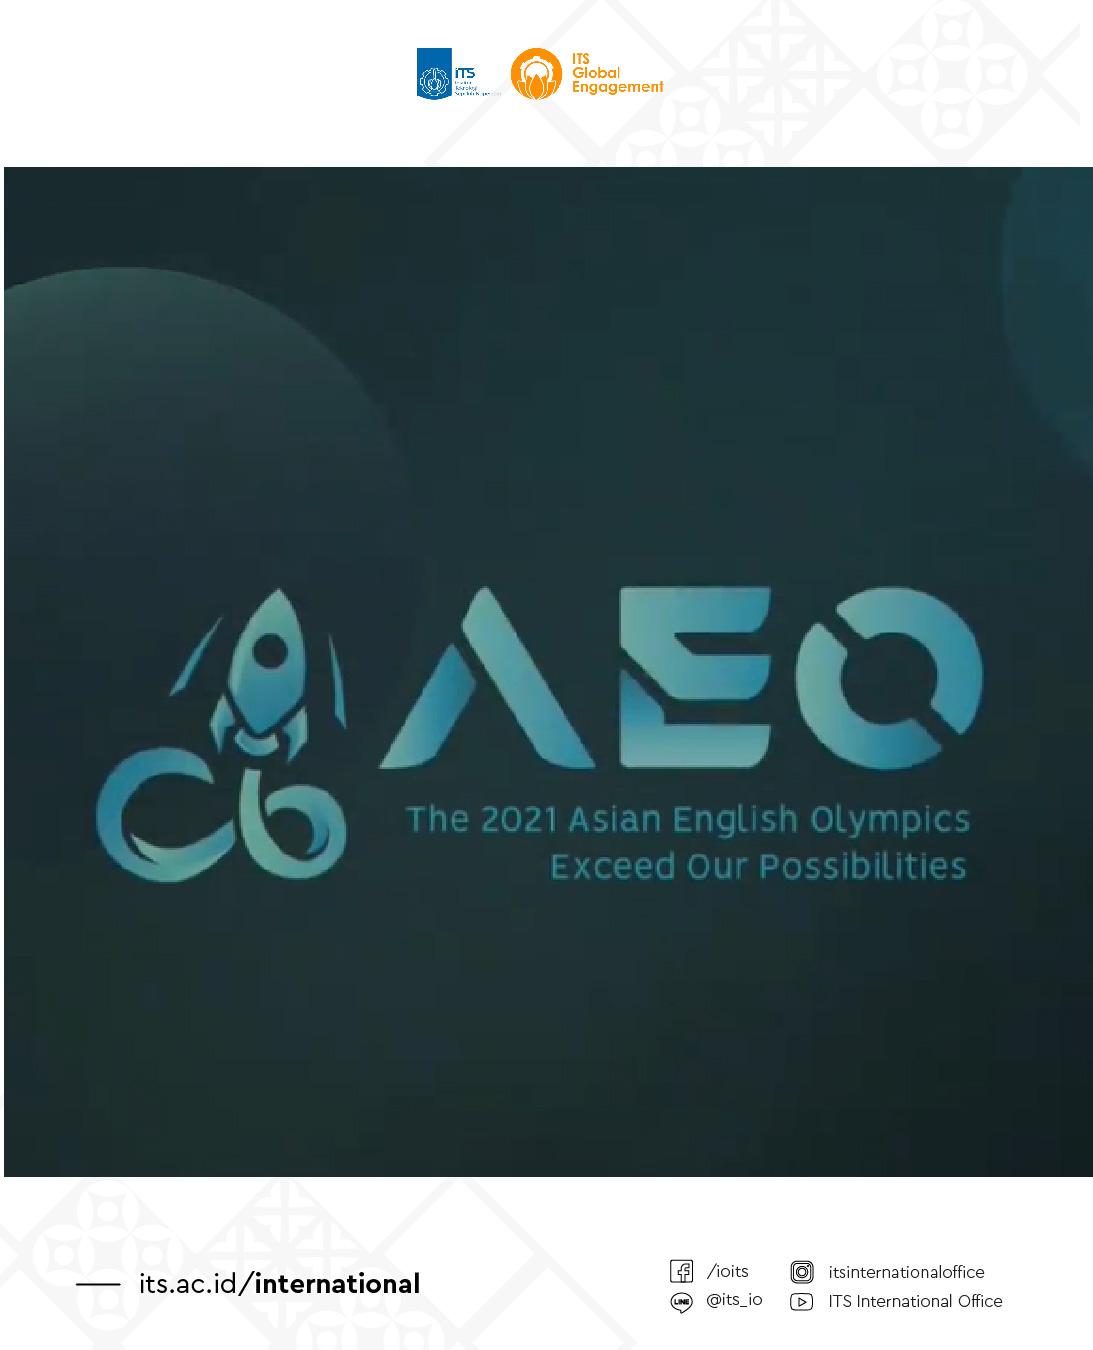 The 2021 Asian English Olympics 2 ITS Global Engagement